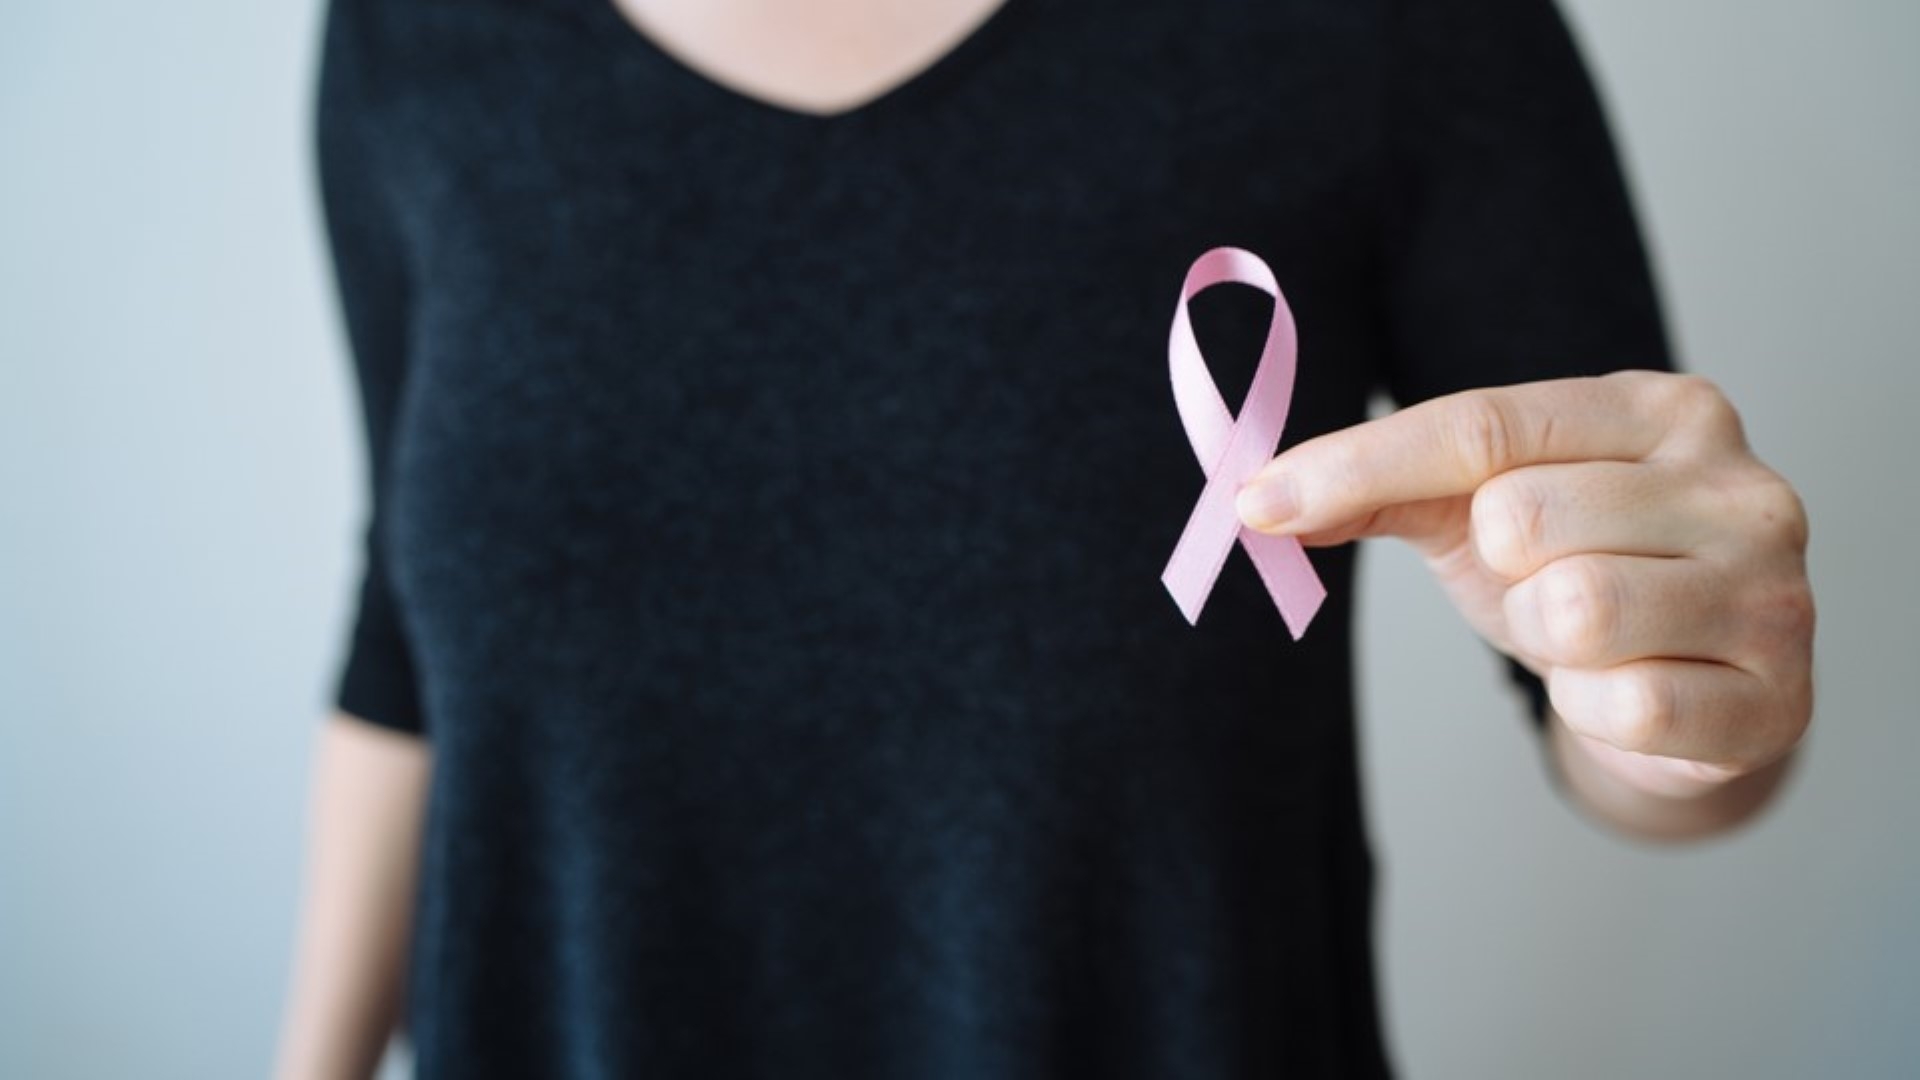 Girl wearing a black tshirt holding a pink ribbon in hand